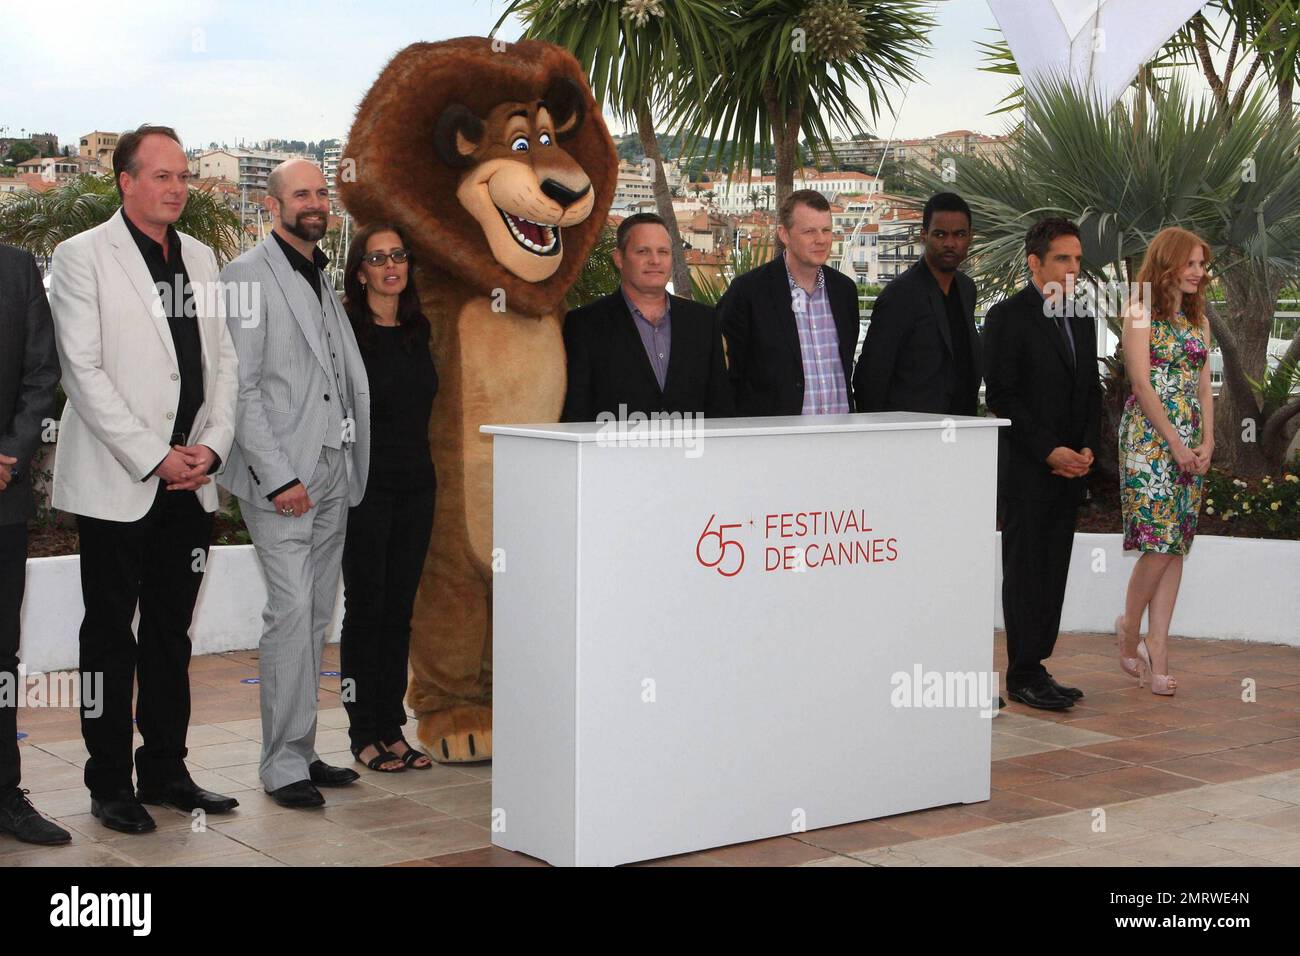 Co-director Tom McGrath, co-director Conrad Vernon, producer Mireille Soria, co-director Eric Darnell, producer Mark Swift, actors Chris Rock, Ben Stiller and Jessica Chastain attend the 'Madagascar 3: Europe's Most Wanted' Photocall during the 65th Annual Cannes Film Festival held at the Palais des Festivals in Cannes, France. 18th May 2012. Stock Photo